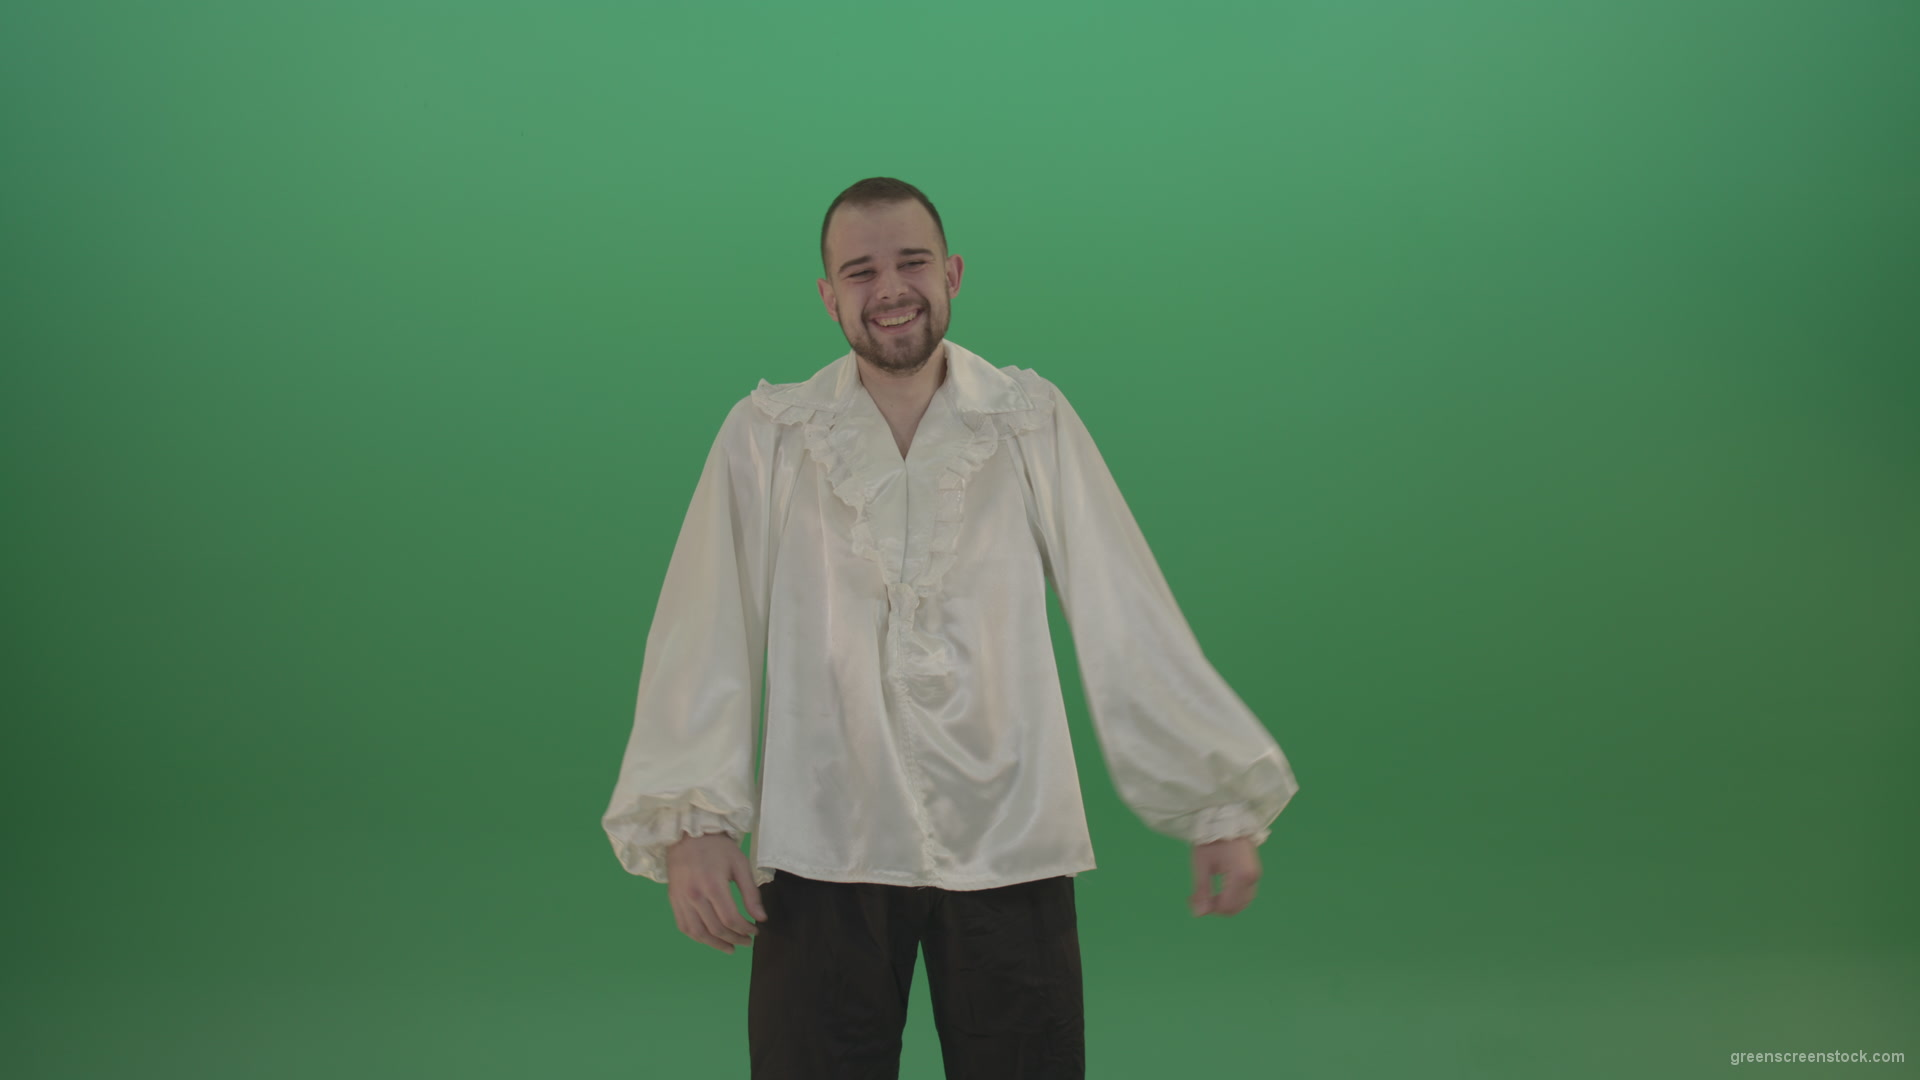 Scarry-laughing-from-the-professional-actor-in-white-shirt-isolated-on-green-screen-background_008 Green Screen Stock